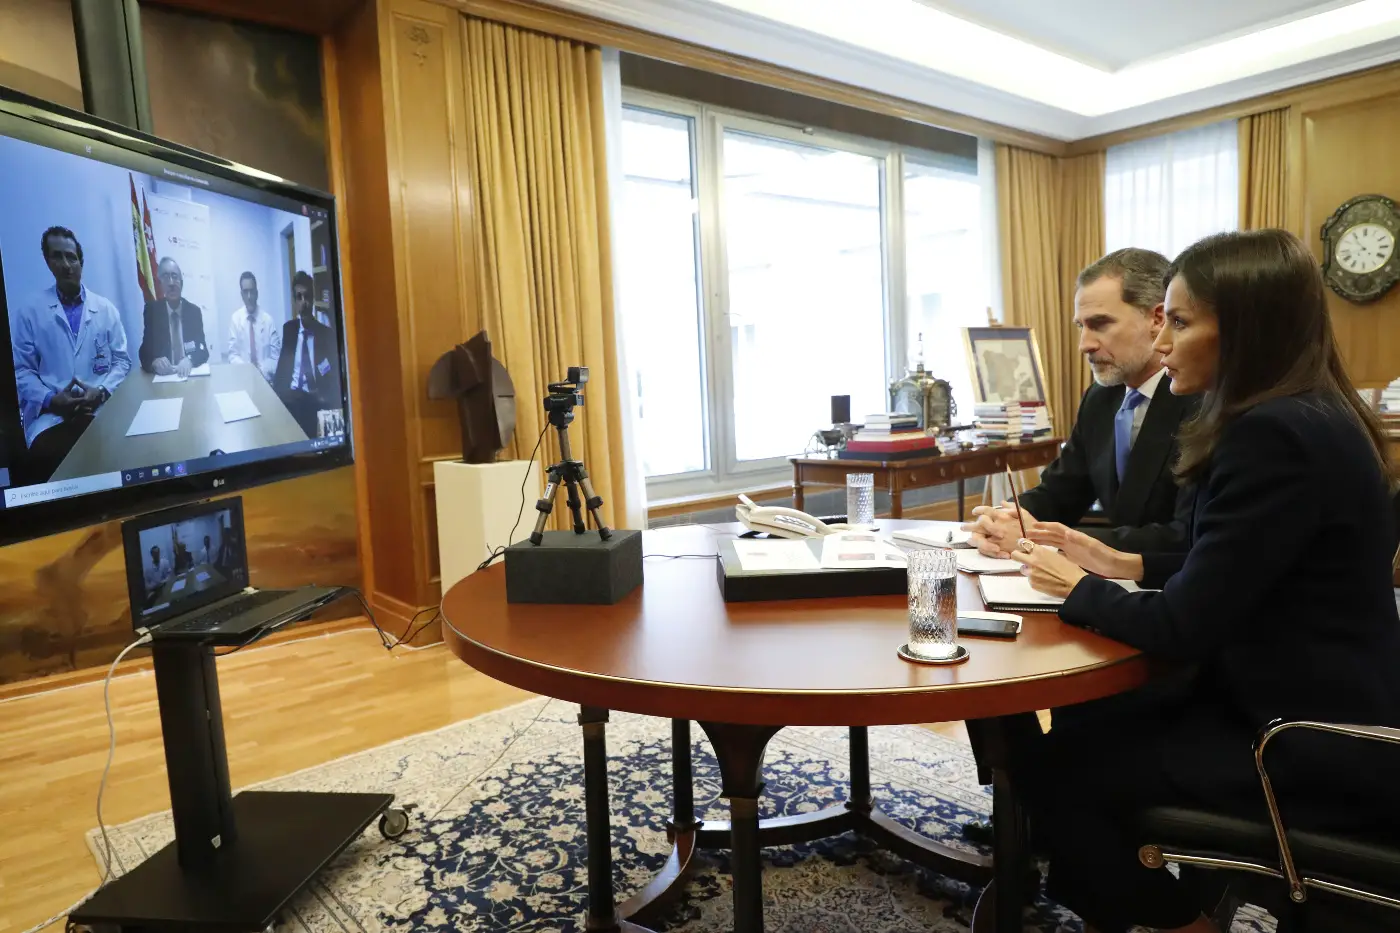 Queen joined King Felipe for a video conference with the medical team and scientist at the Hospital Clínico San Carlos de Madrid